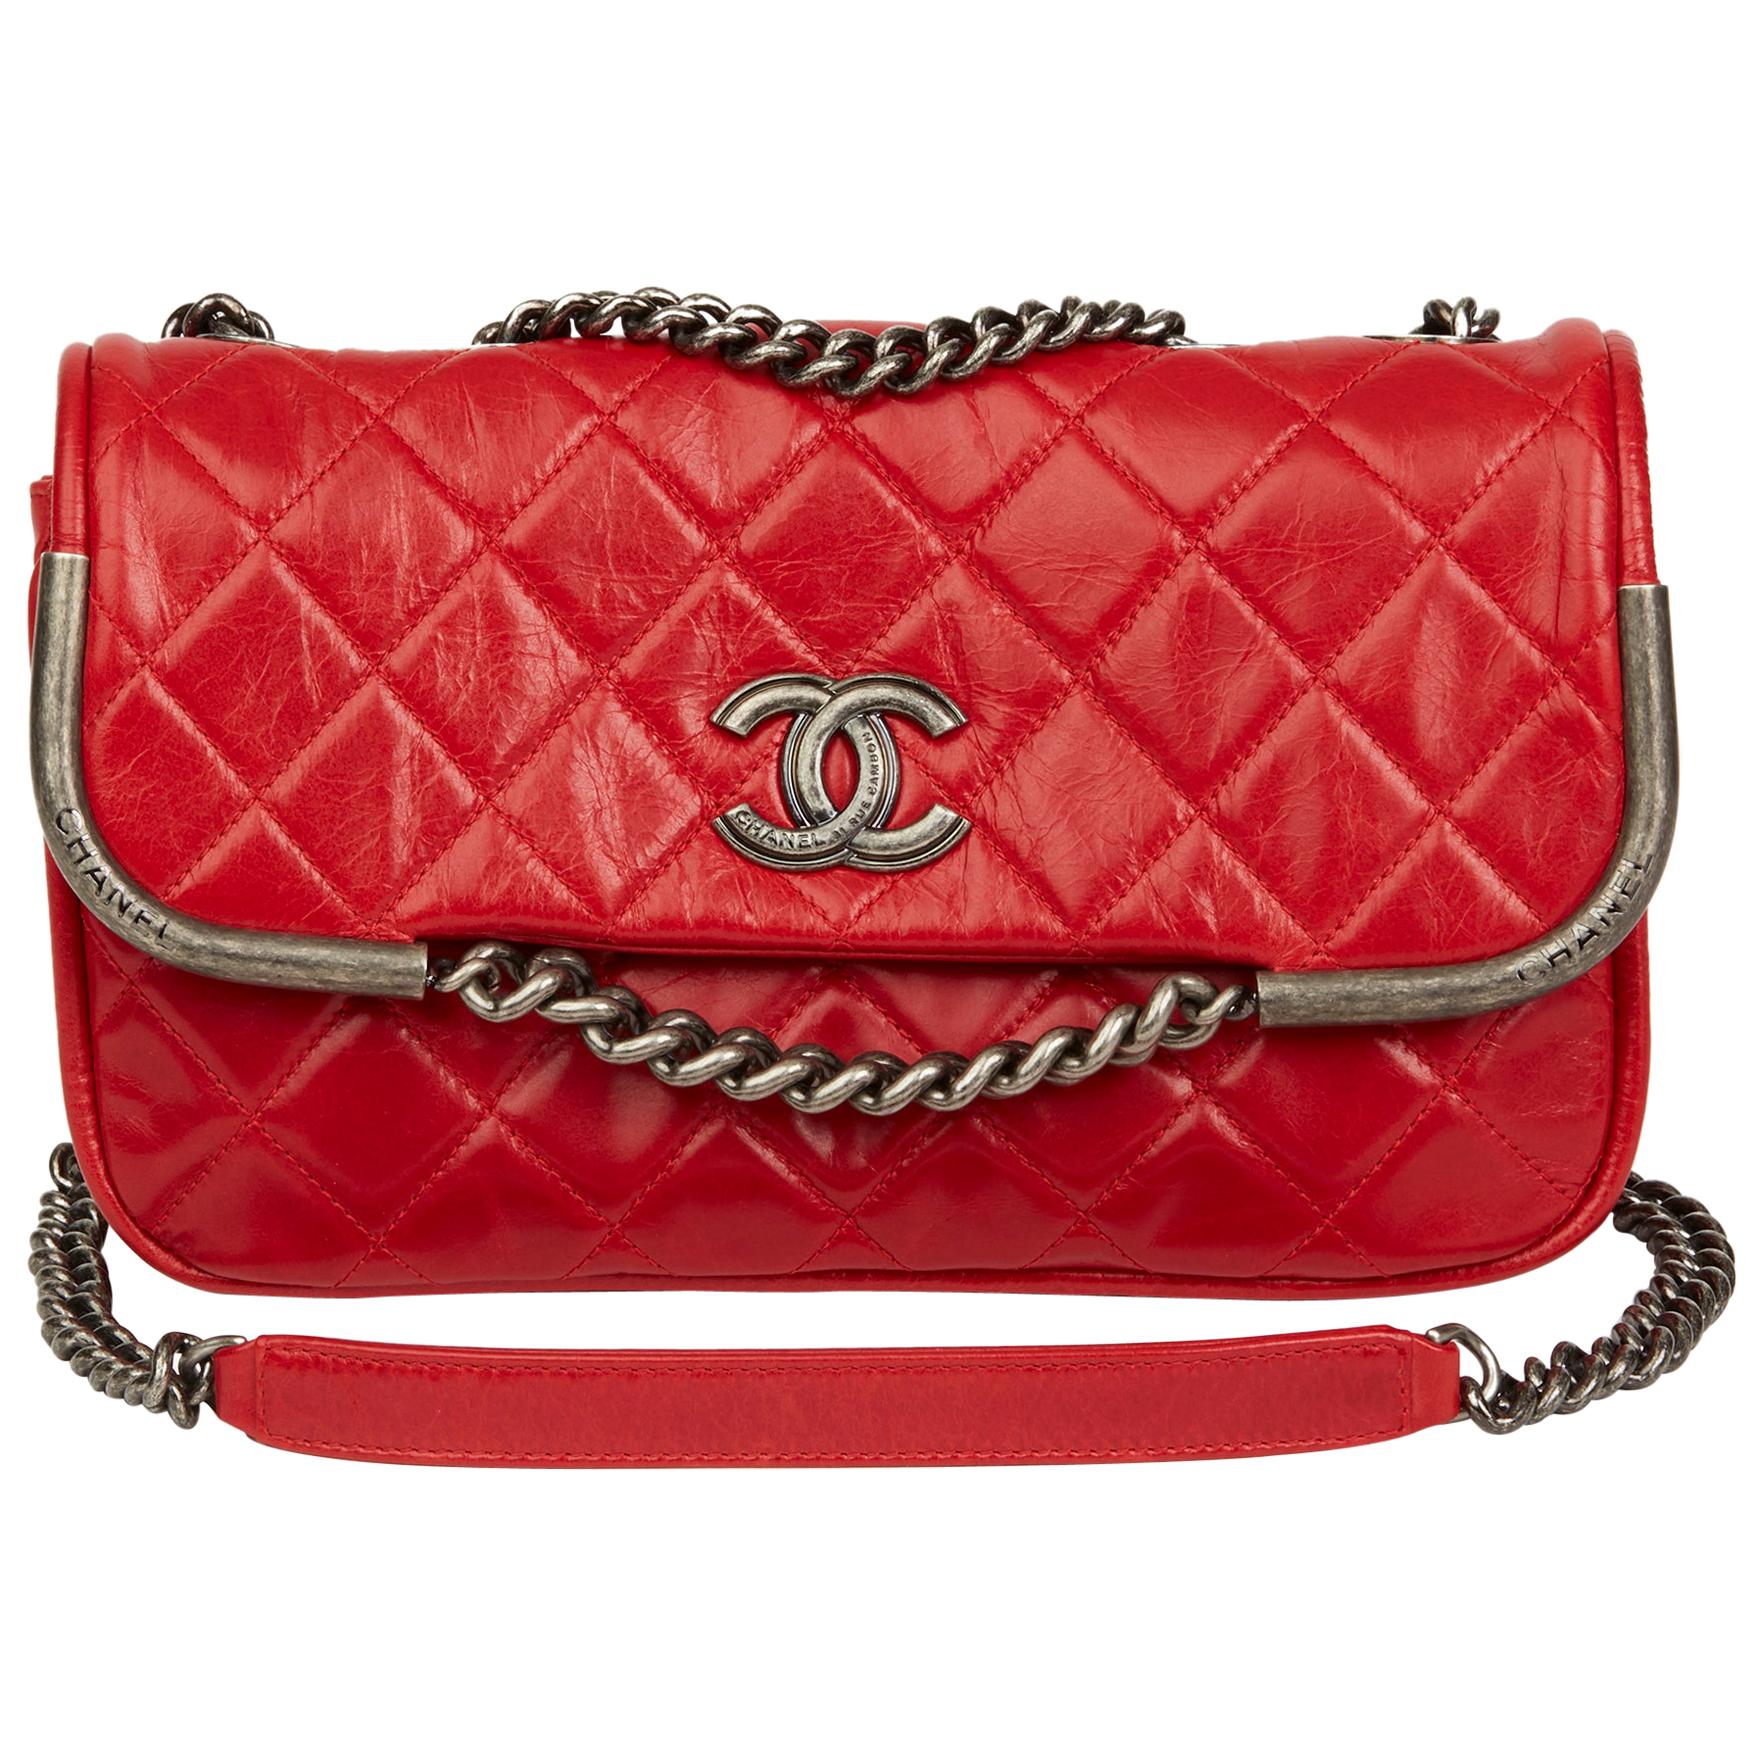 2014 Chanel Red Quilted Aged Calfskin Leather Single Flap Bag